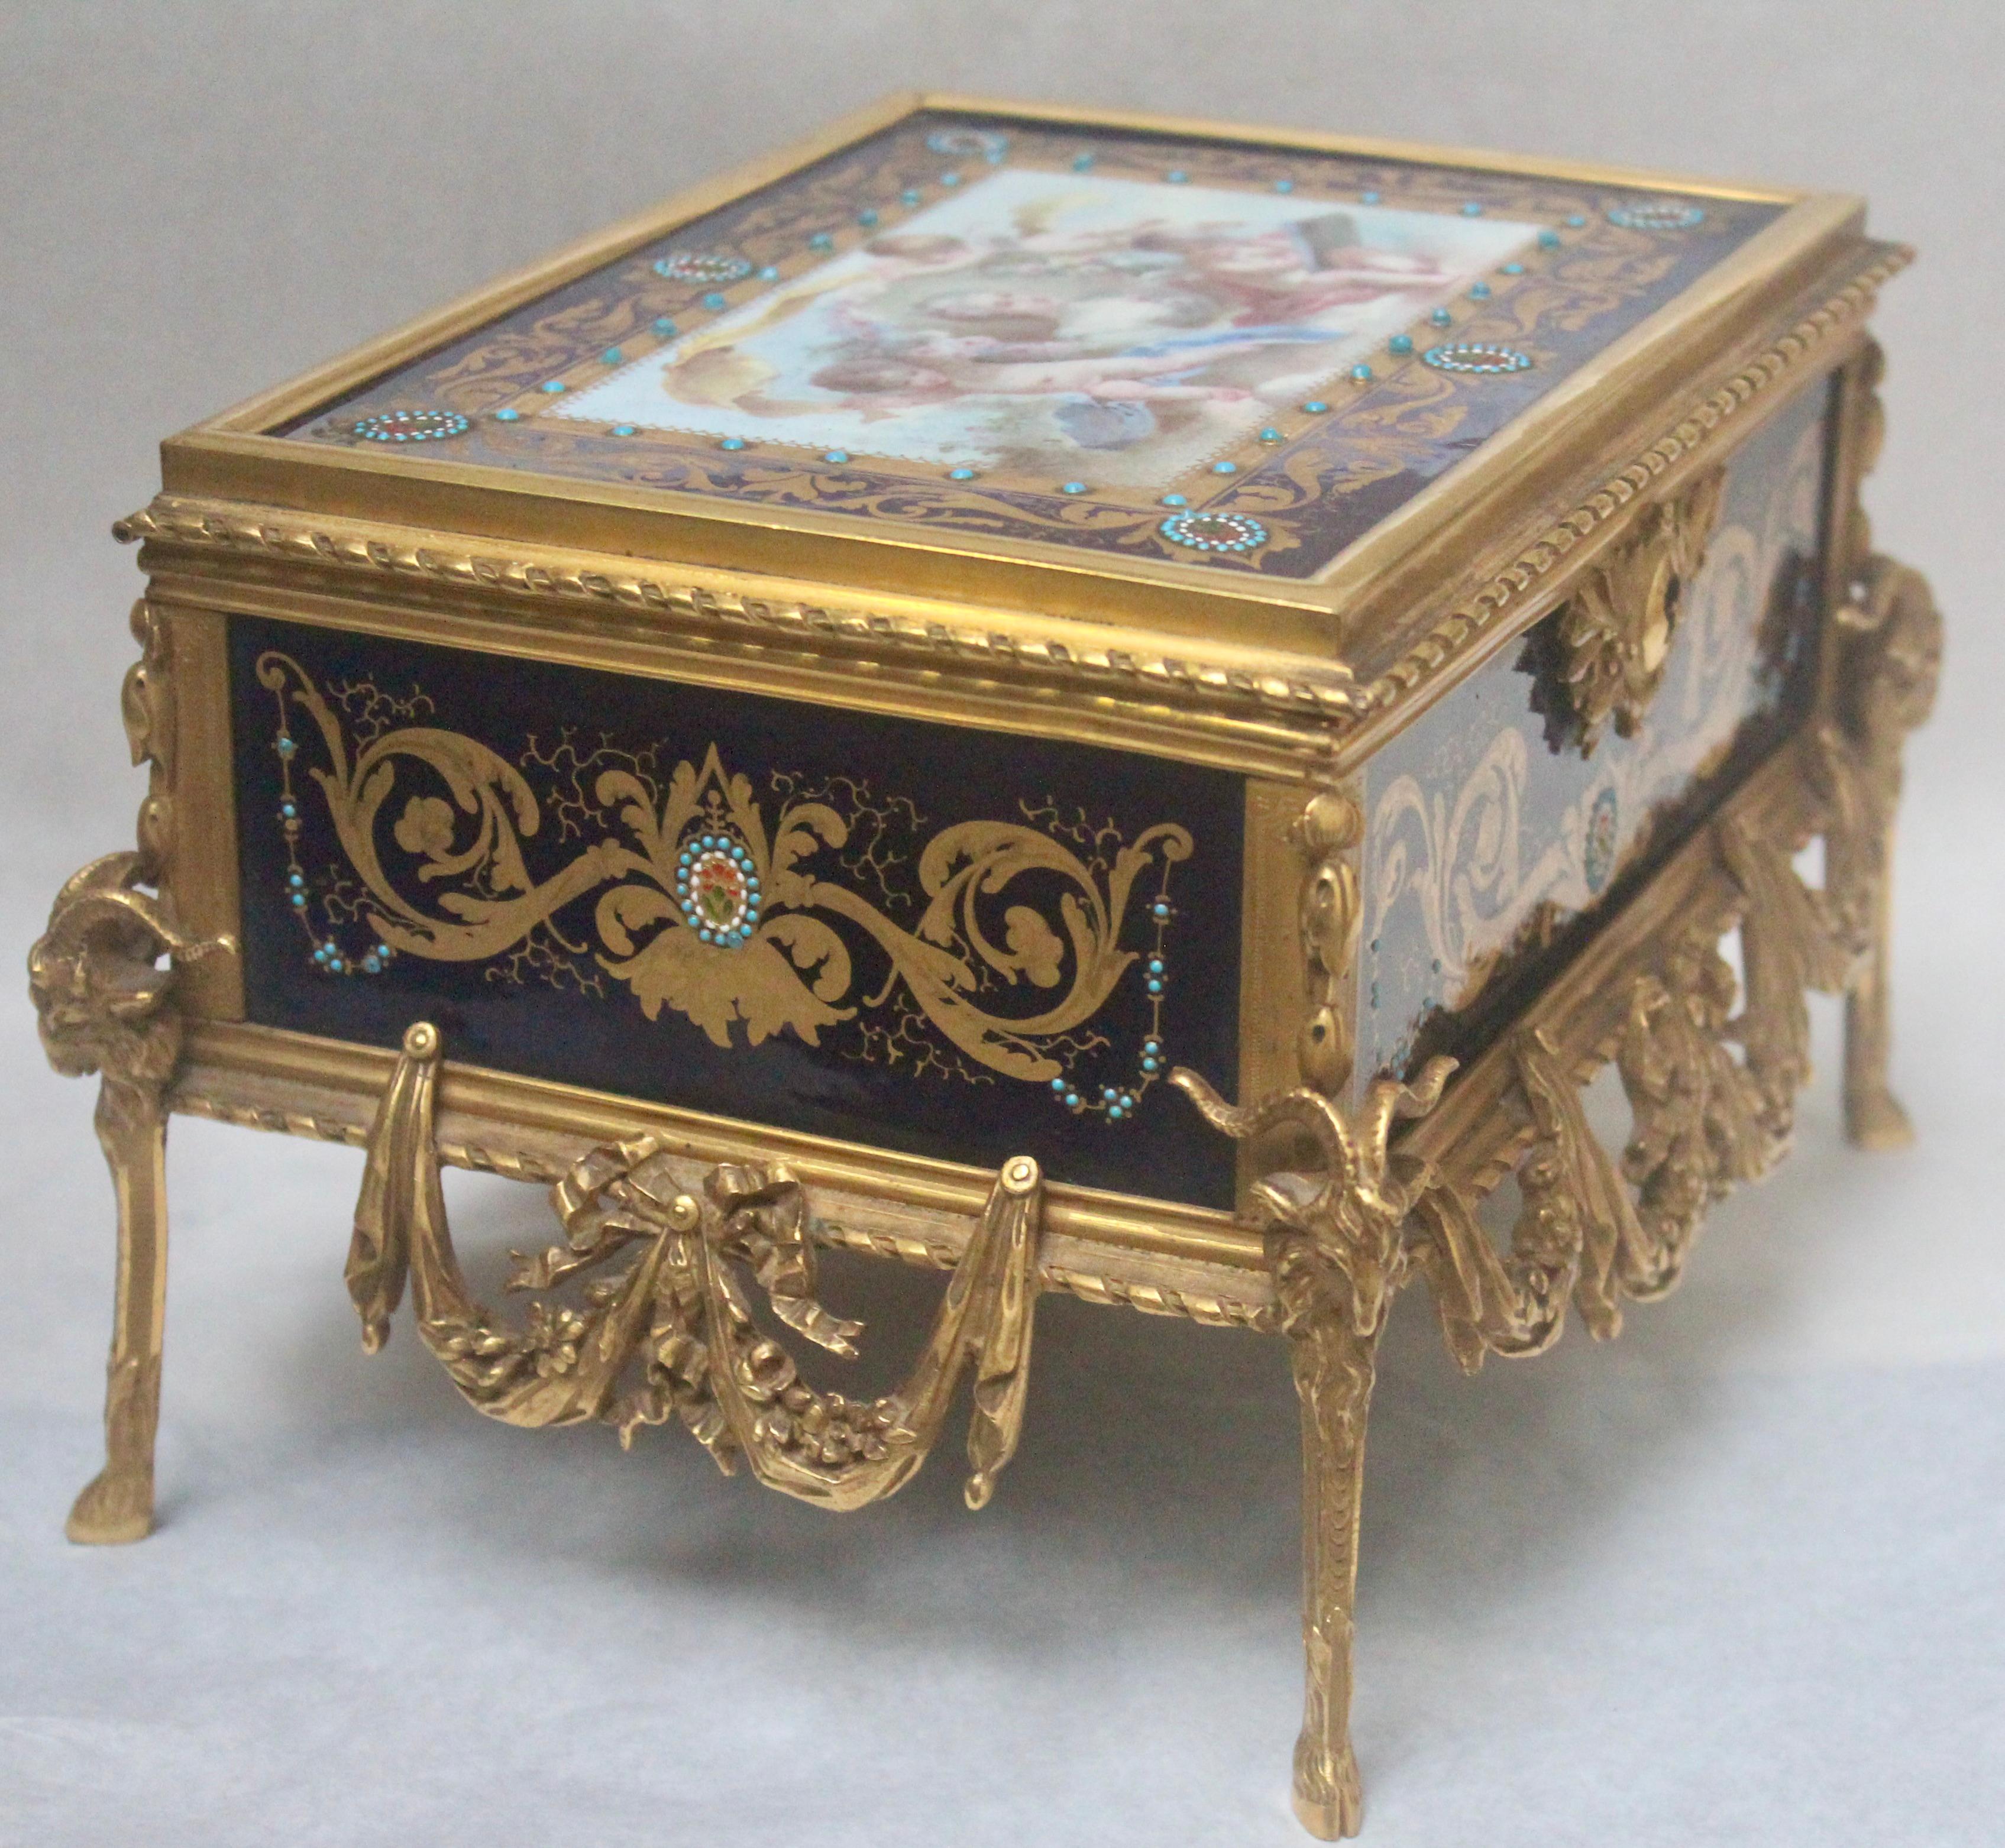 French 19th Century Enameled and Ormolu-Mounted Jewelry Casket 1